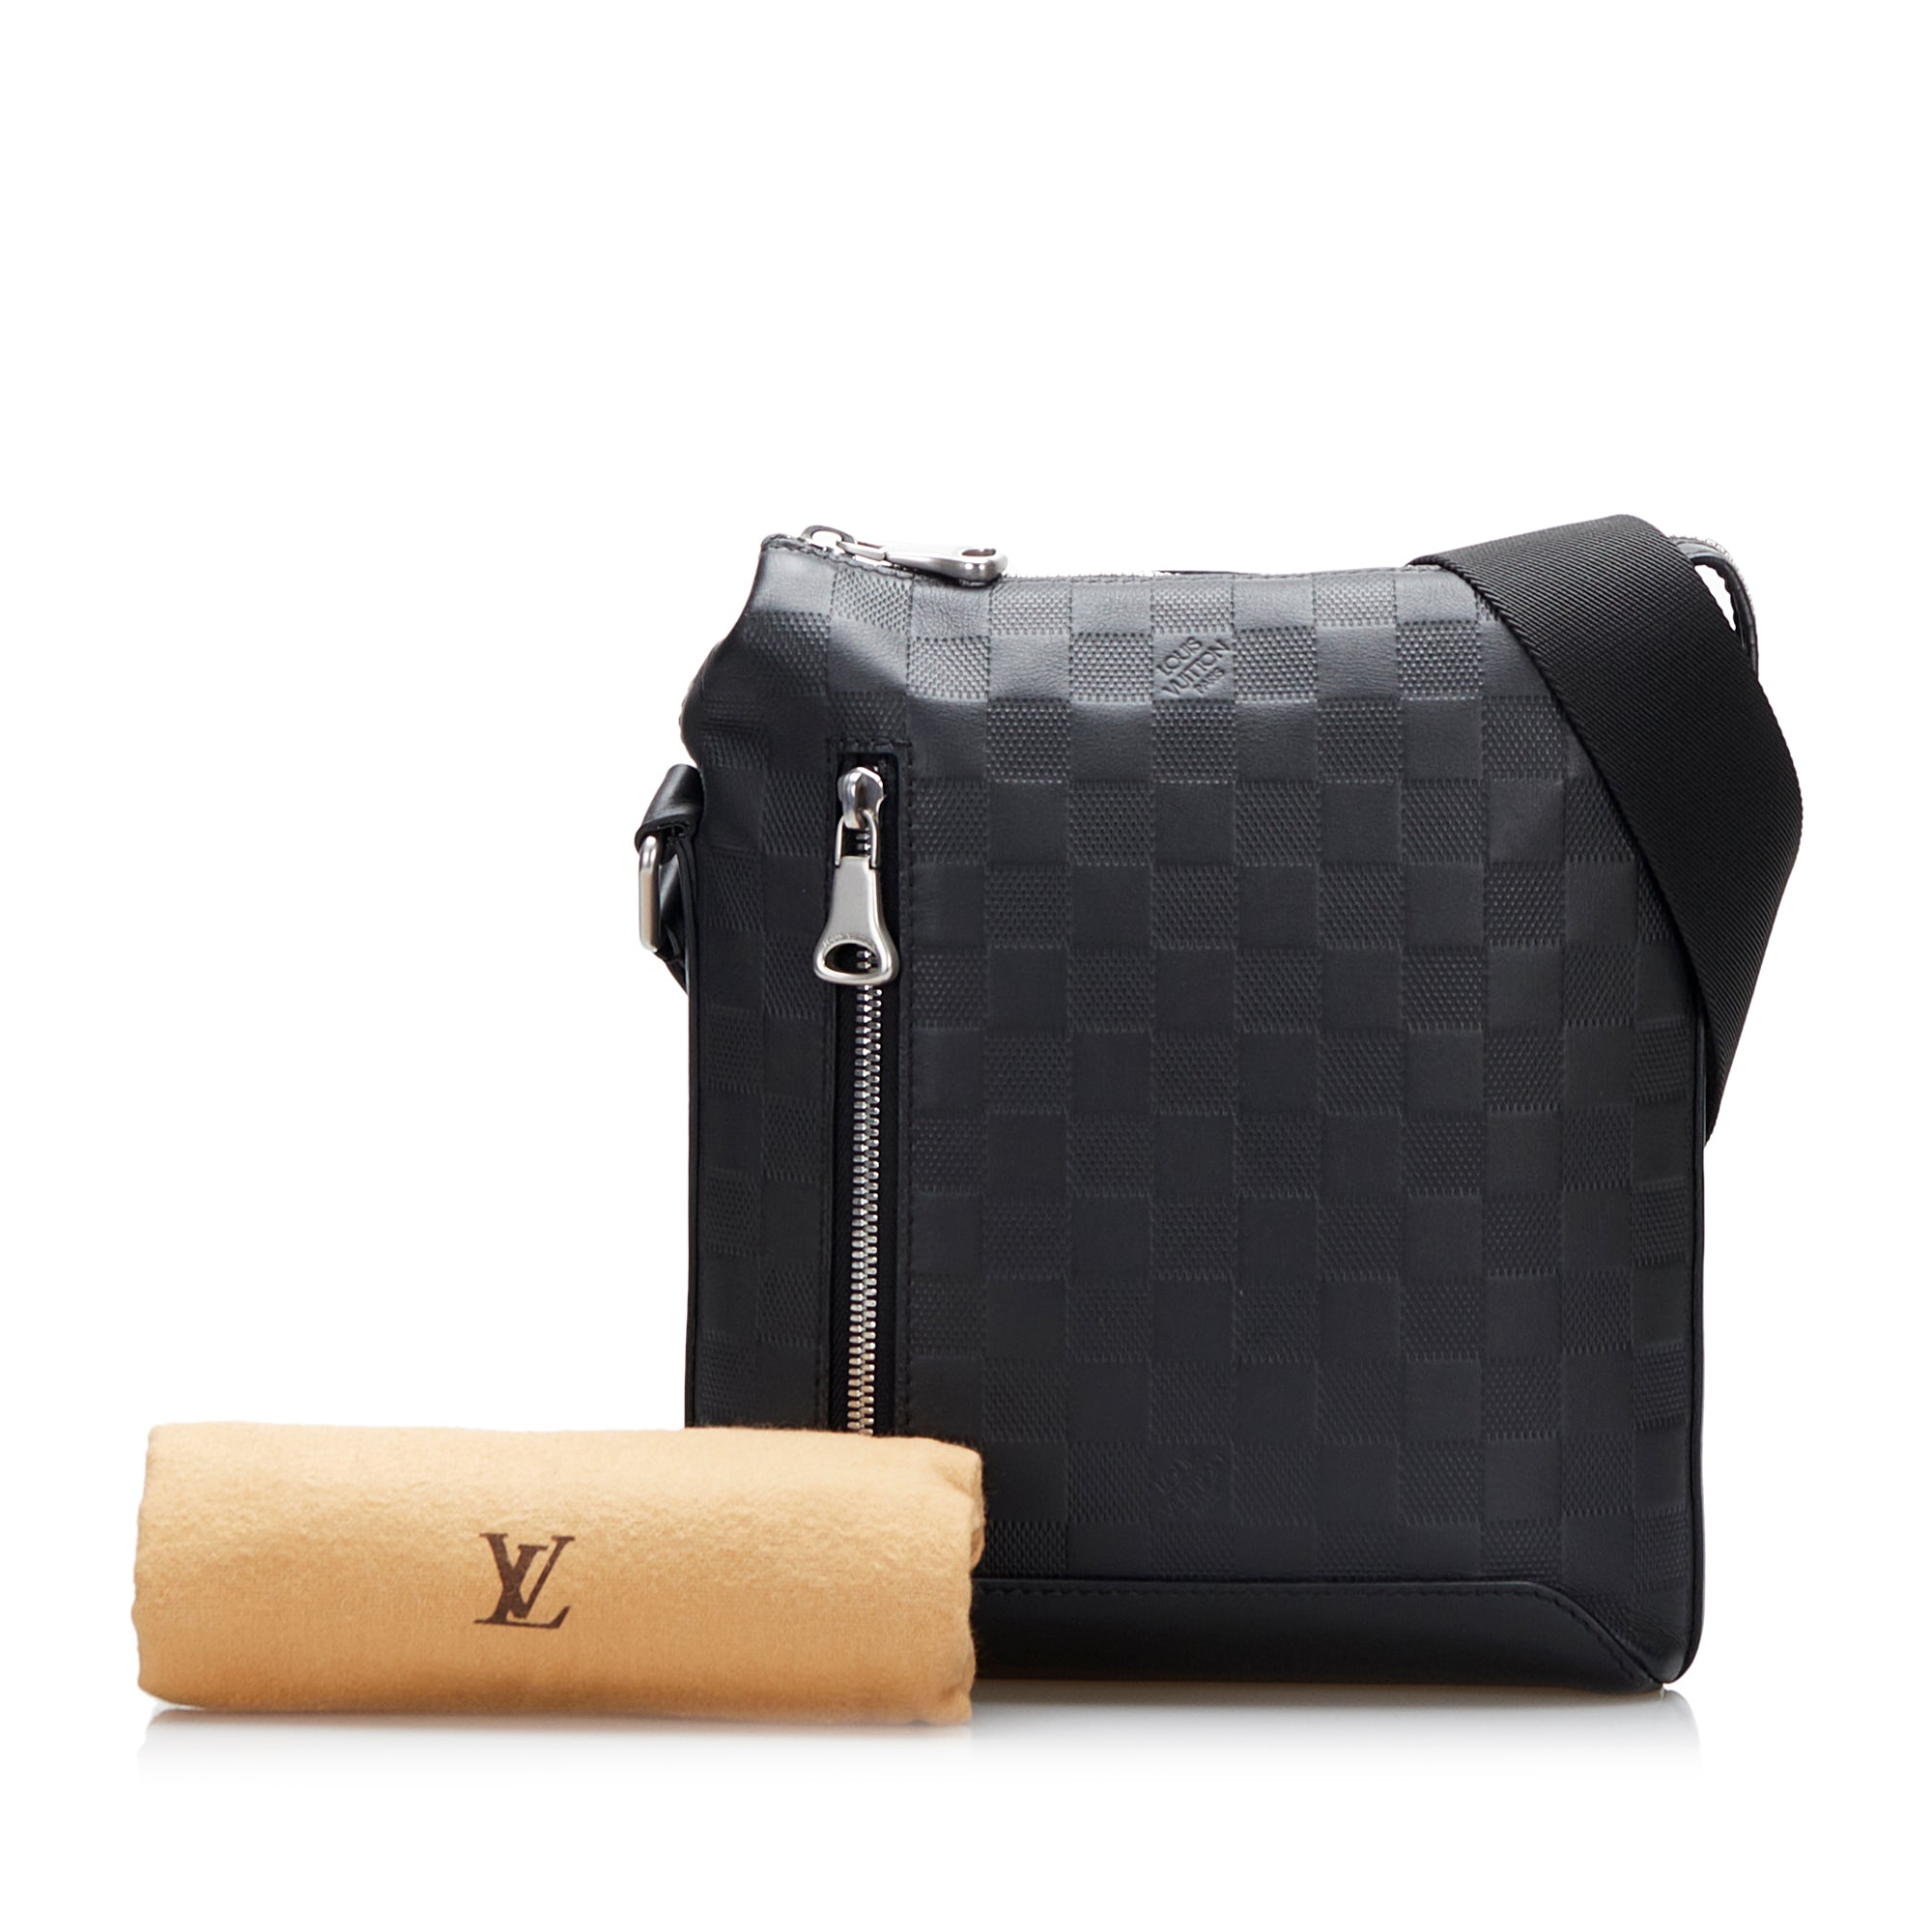 Louis Vuitton Pre-owned Discovery Messenger Bag - Black